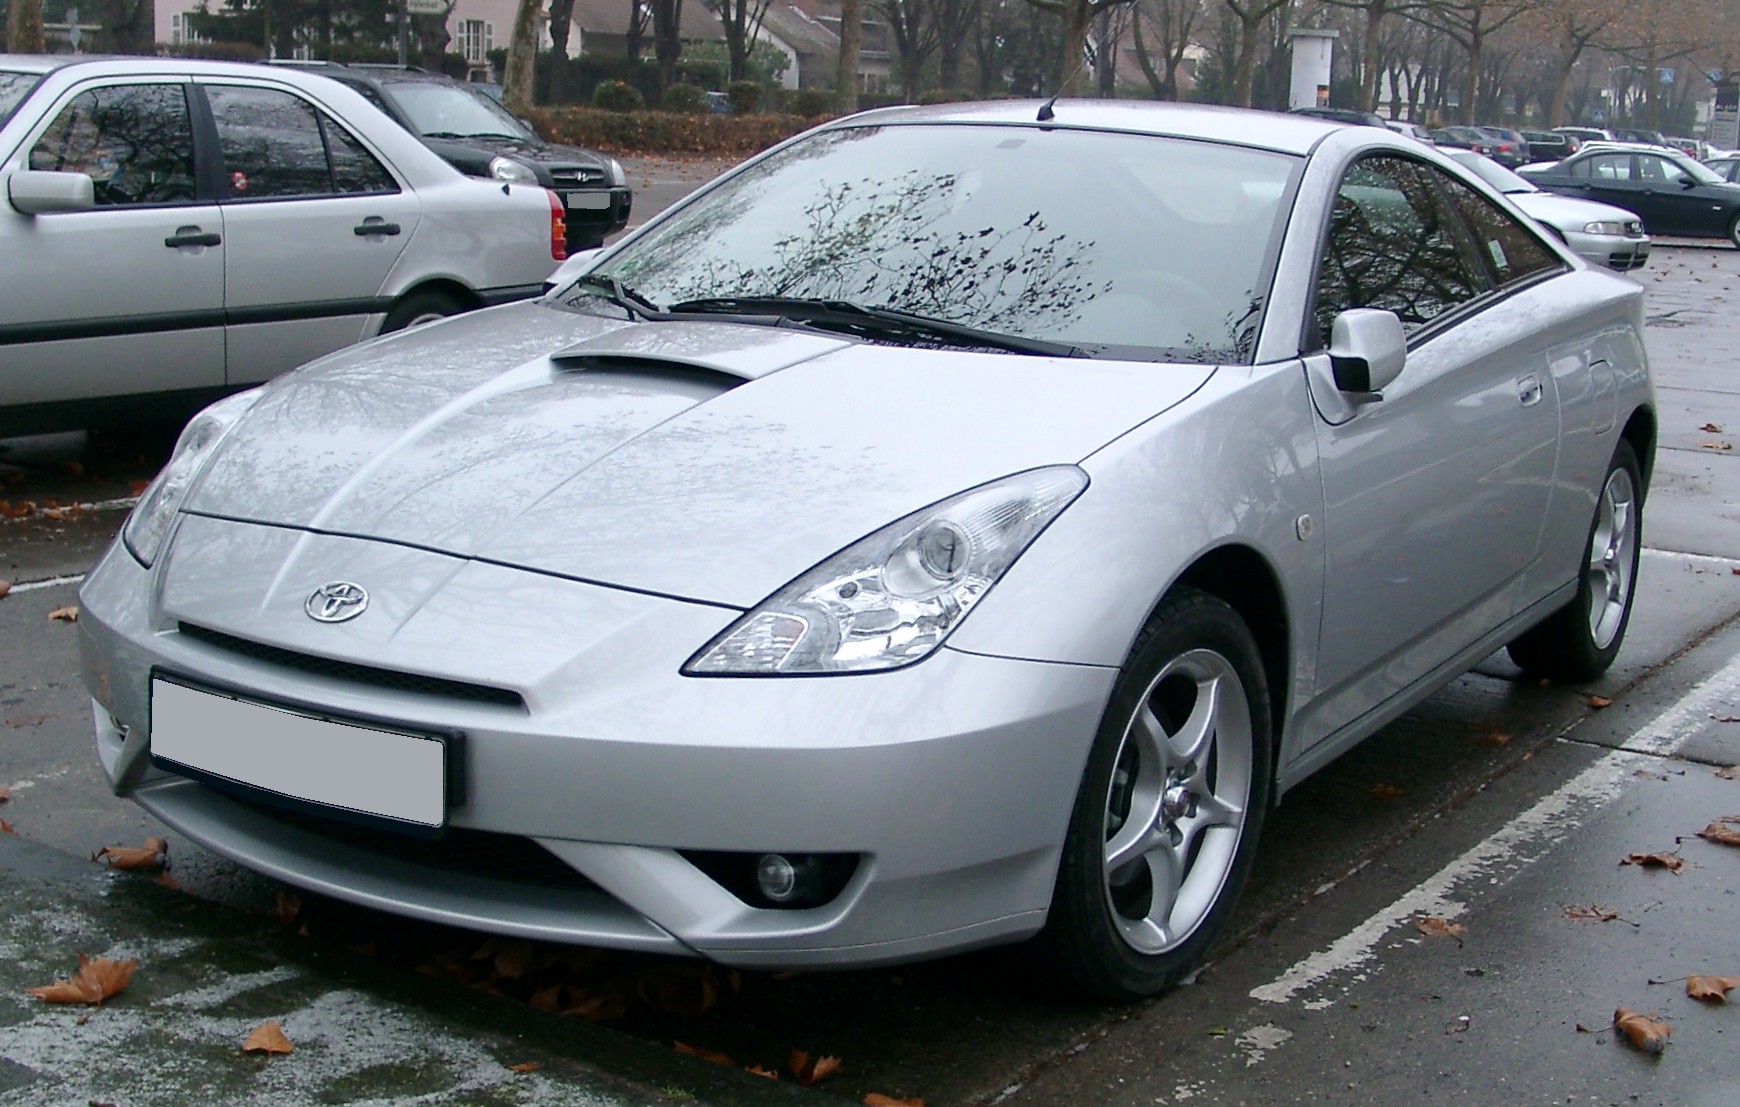 HQ Toyota Celica Wallpapers | File 427.37Kb